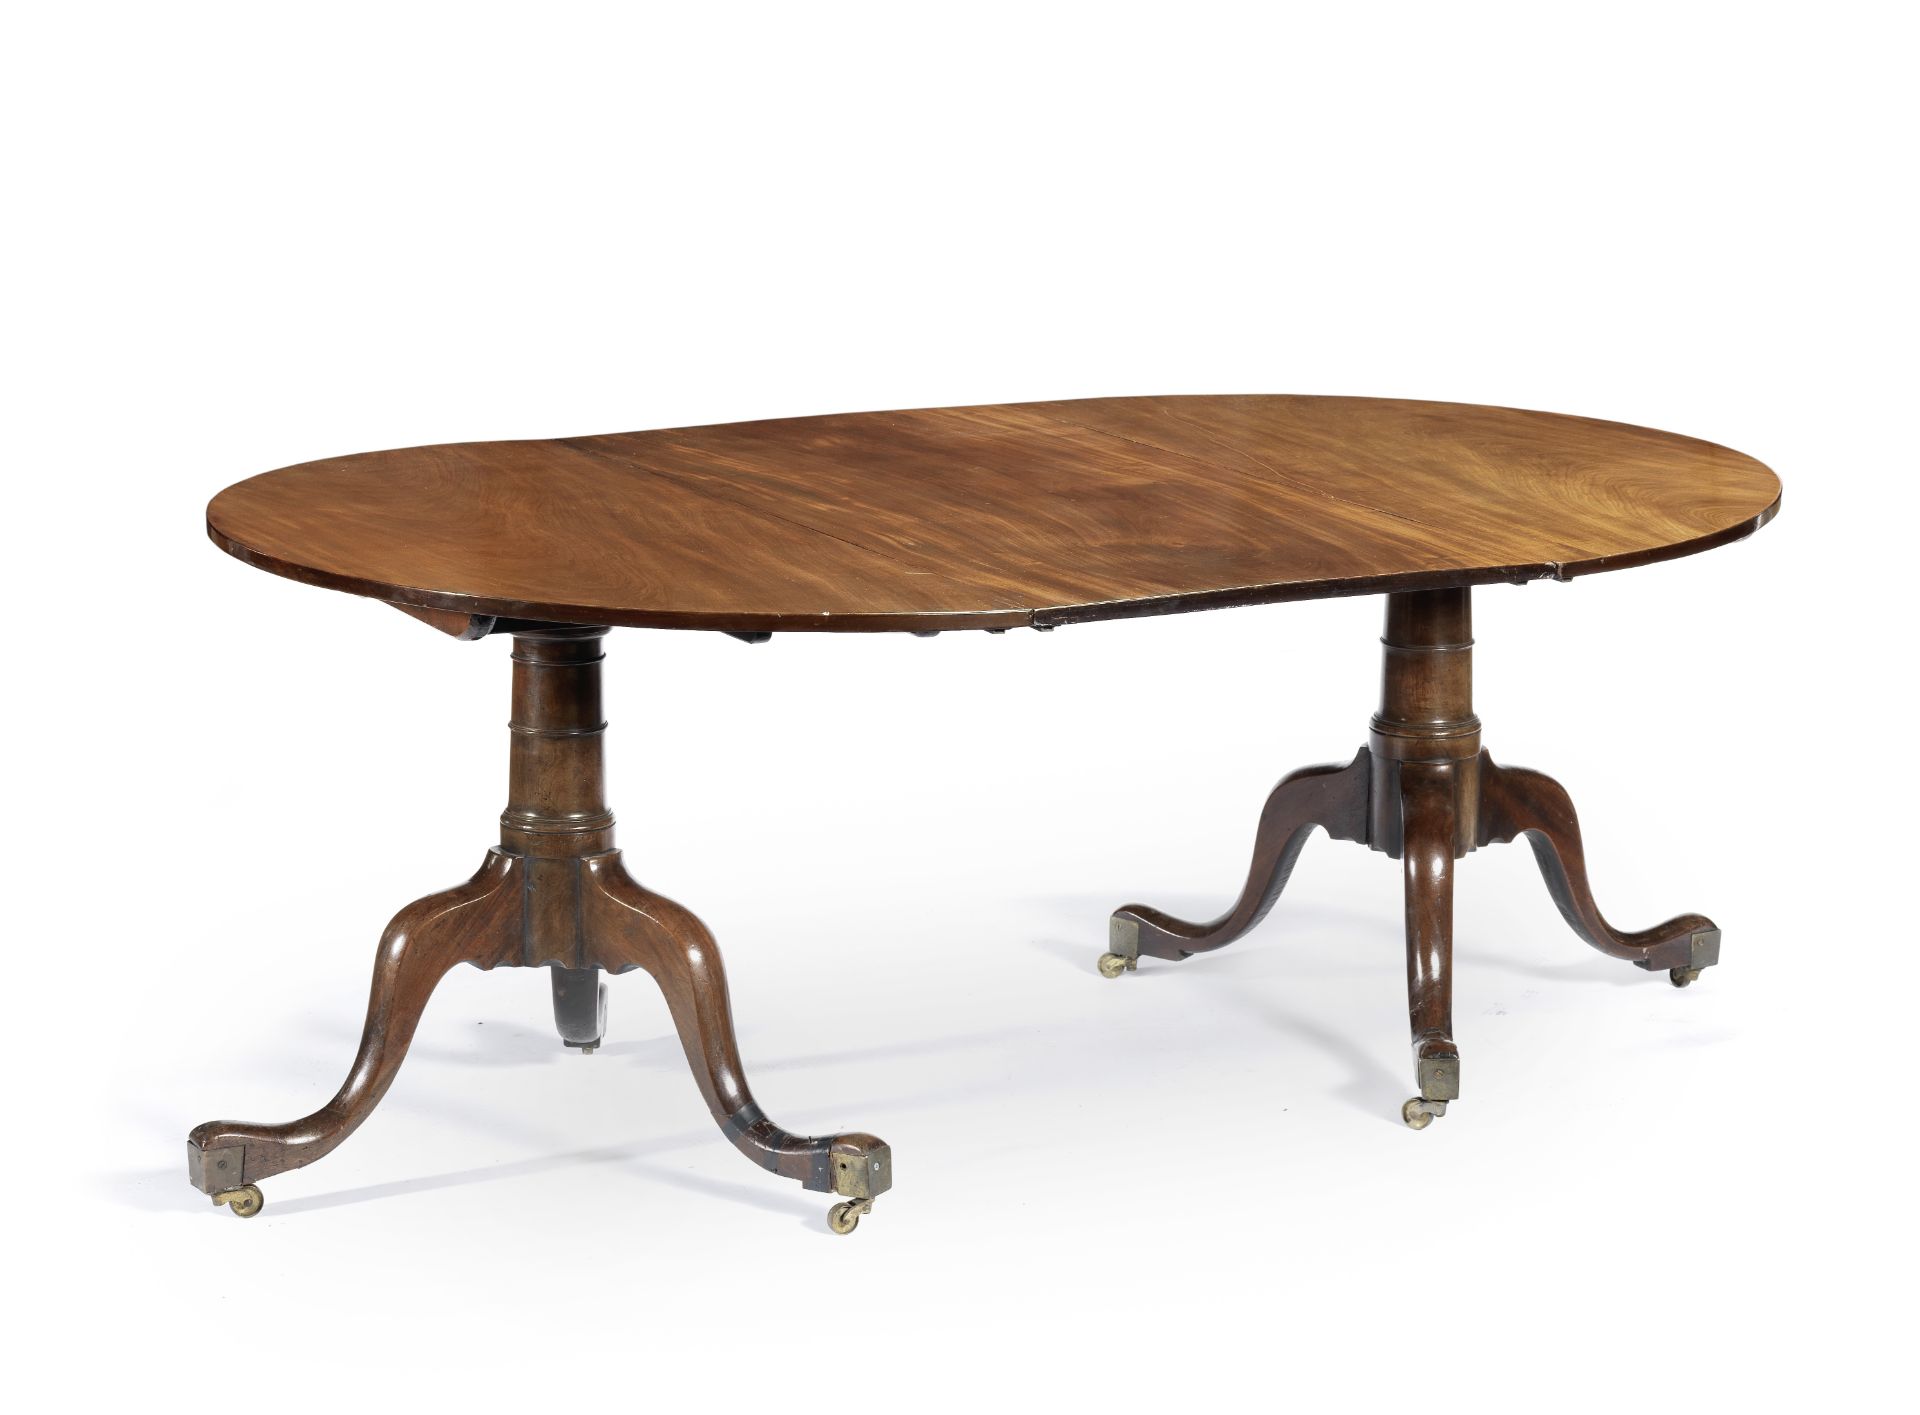 A mahogany twin-Pedestal Dining Table In the George II style